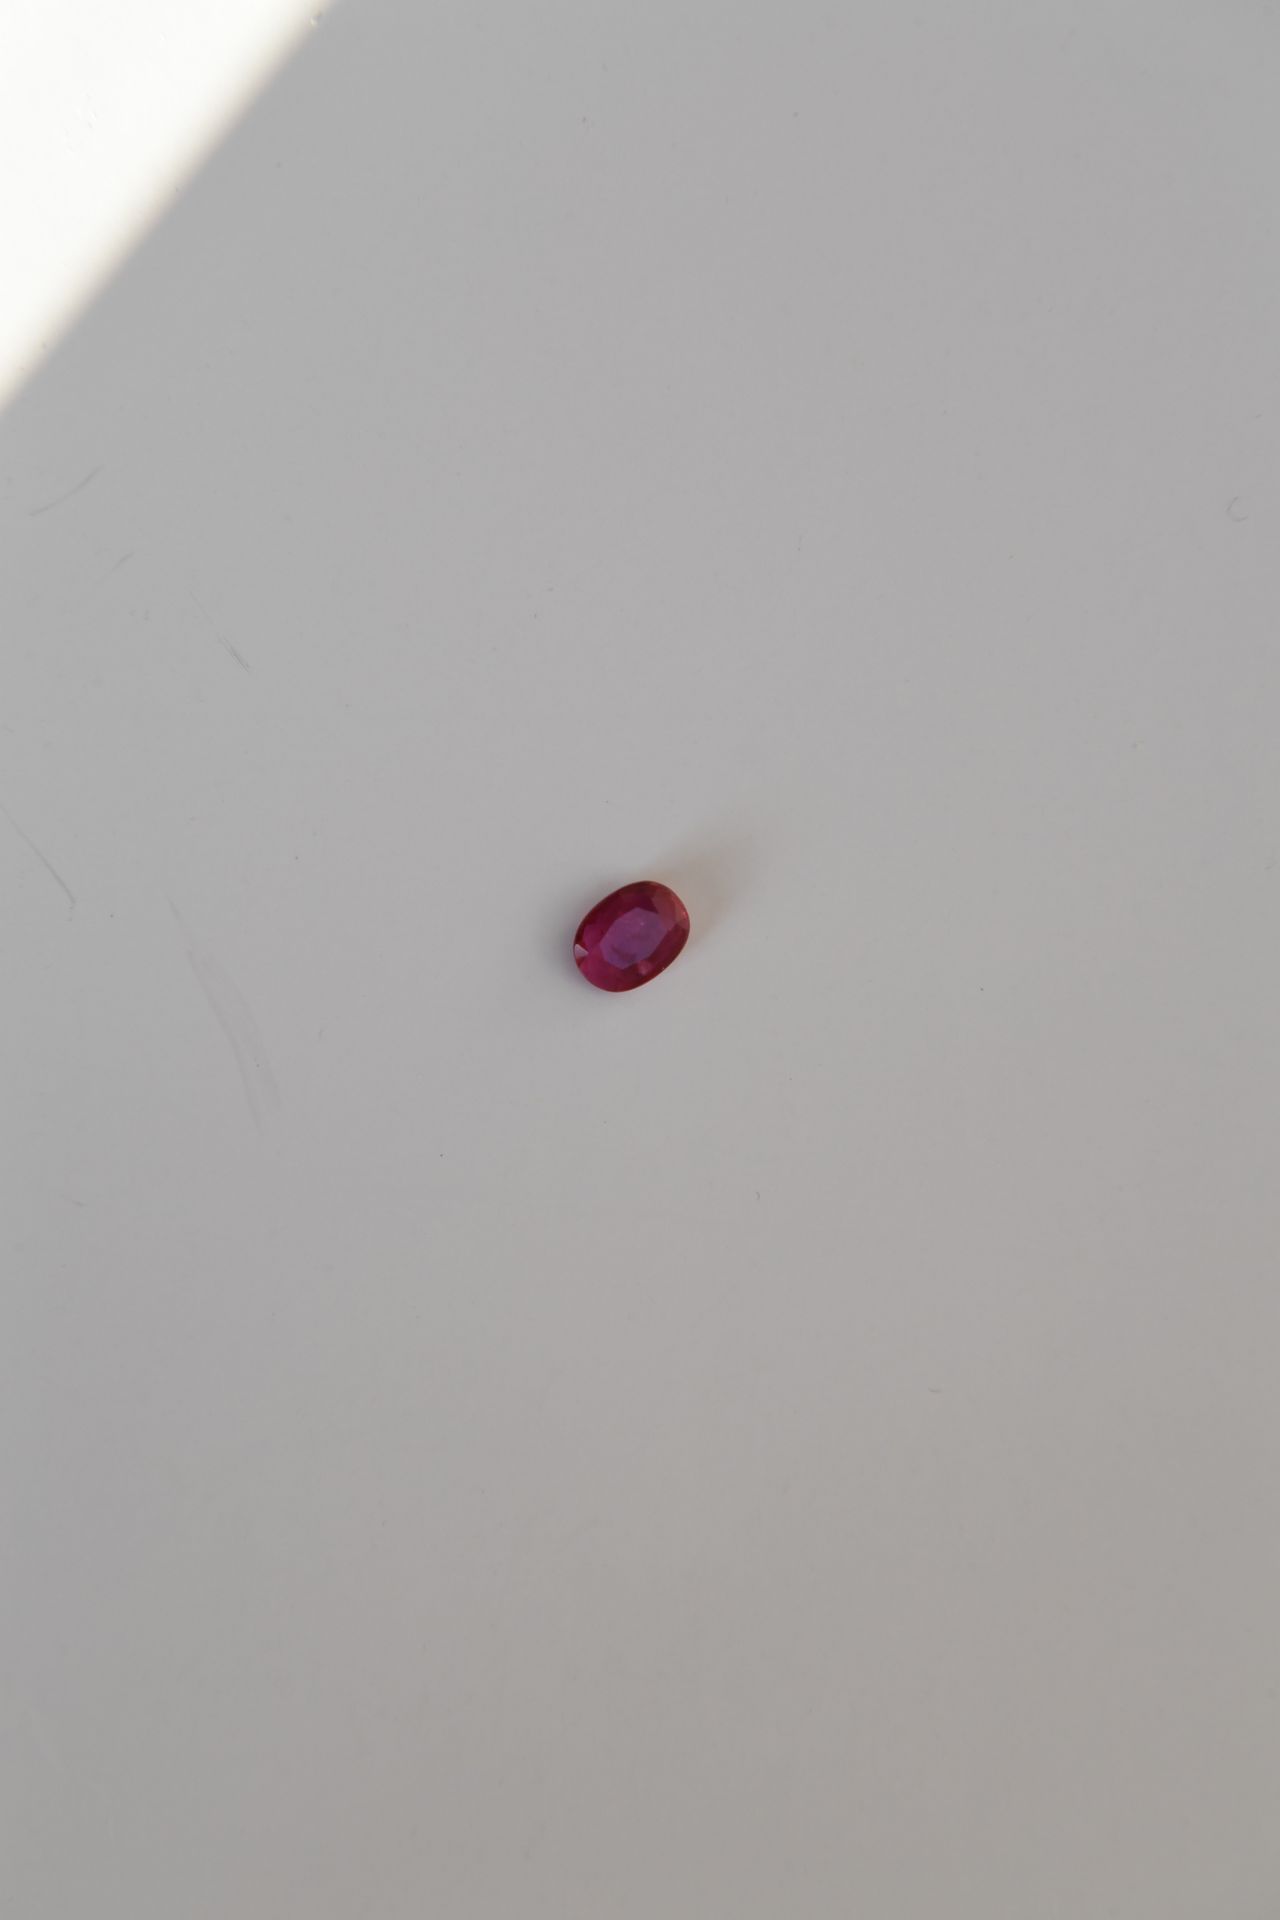 Null Oval cut ruby weighing approximately 0.9 carat.